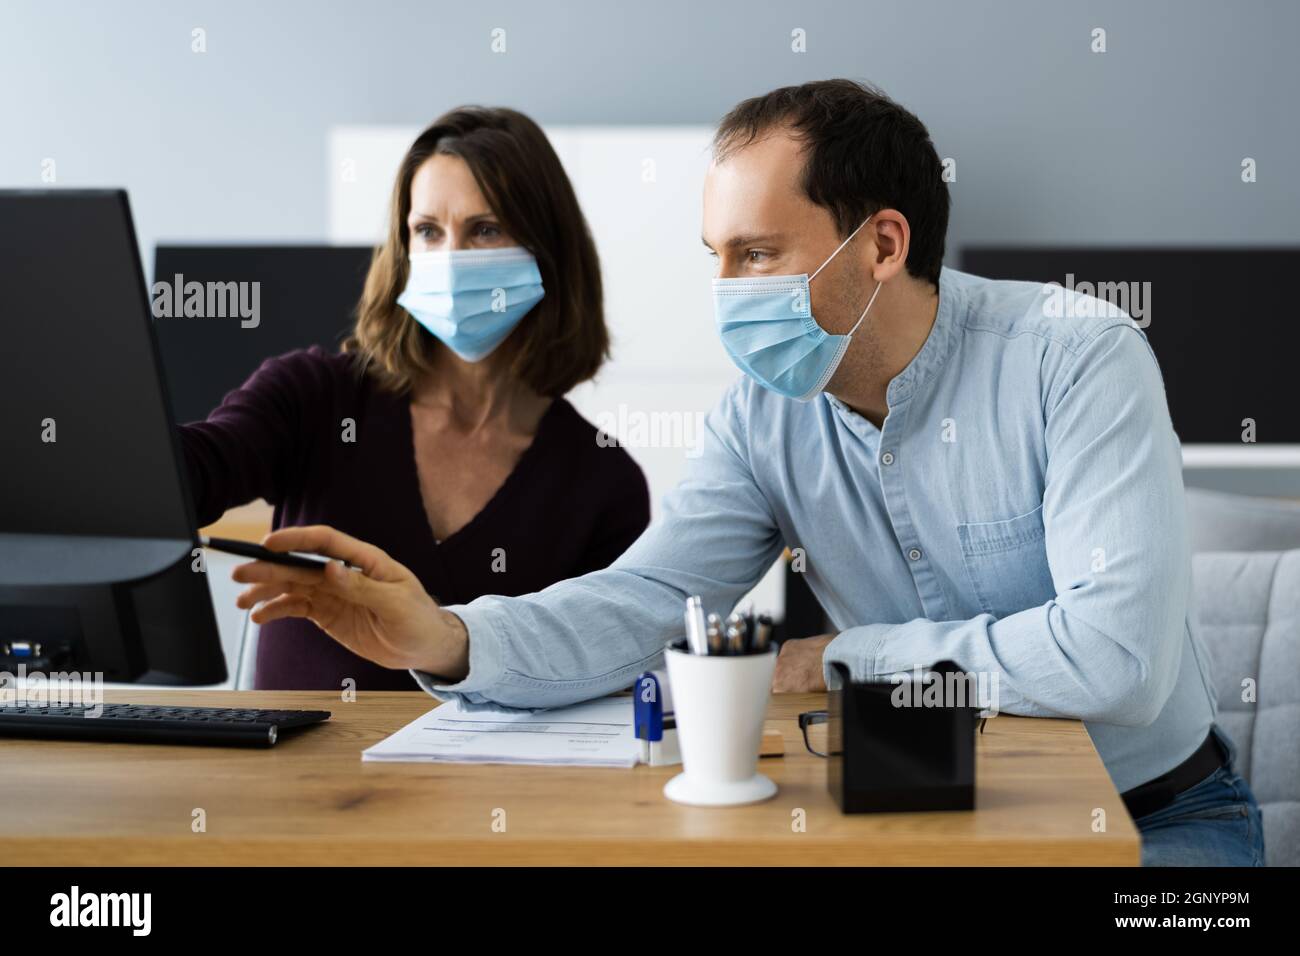 Manager Training Business People At Computer In Face Mask Stock Photo